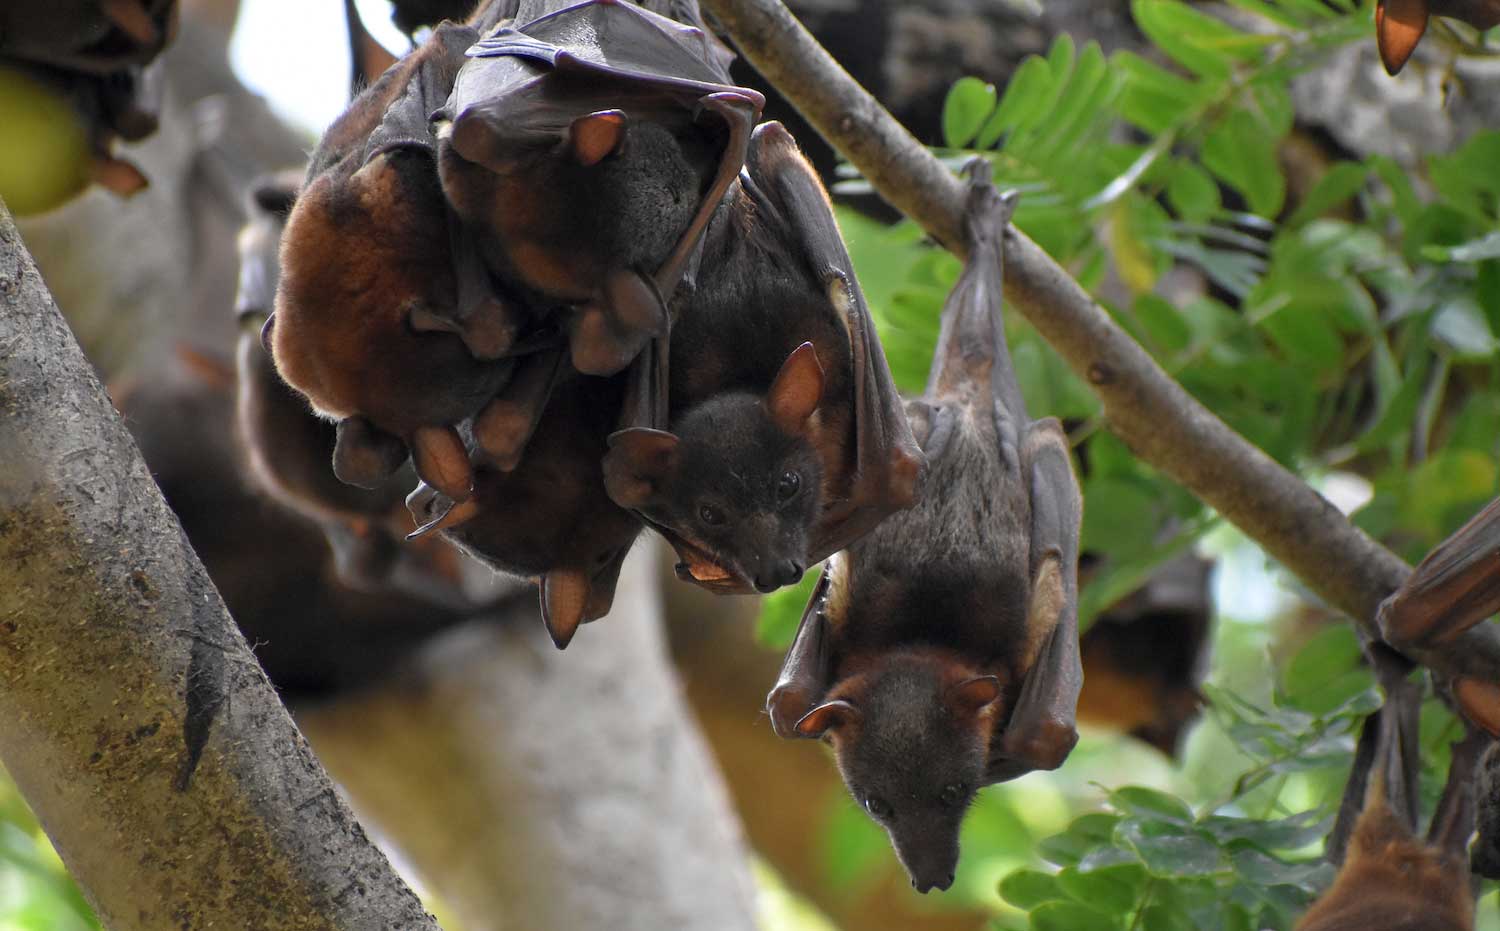 A group of bats hanging from a tree branch.